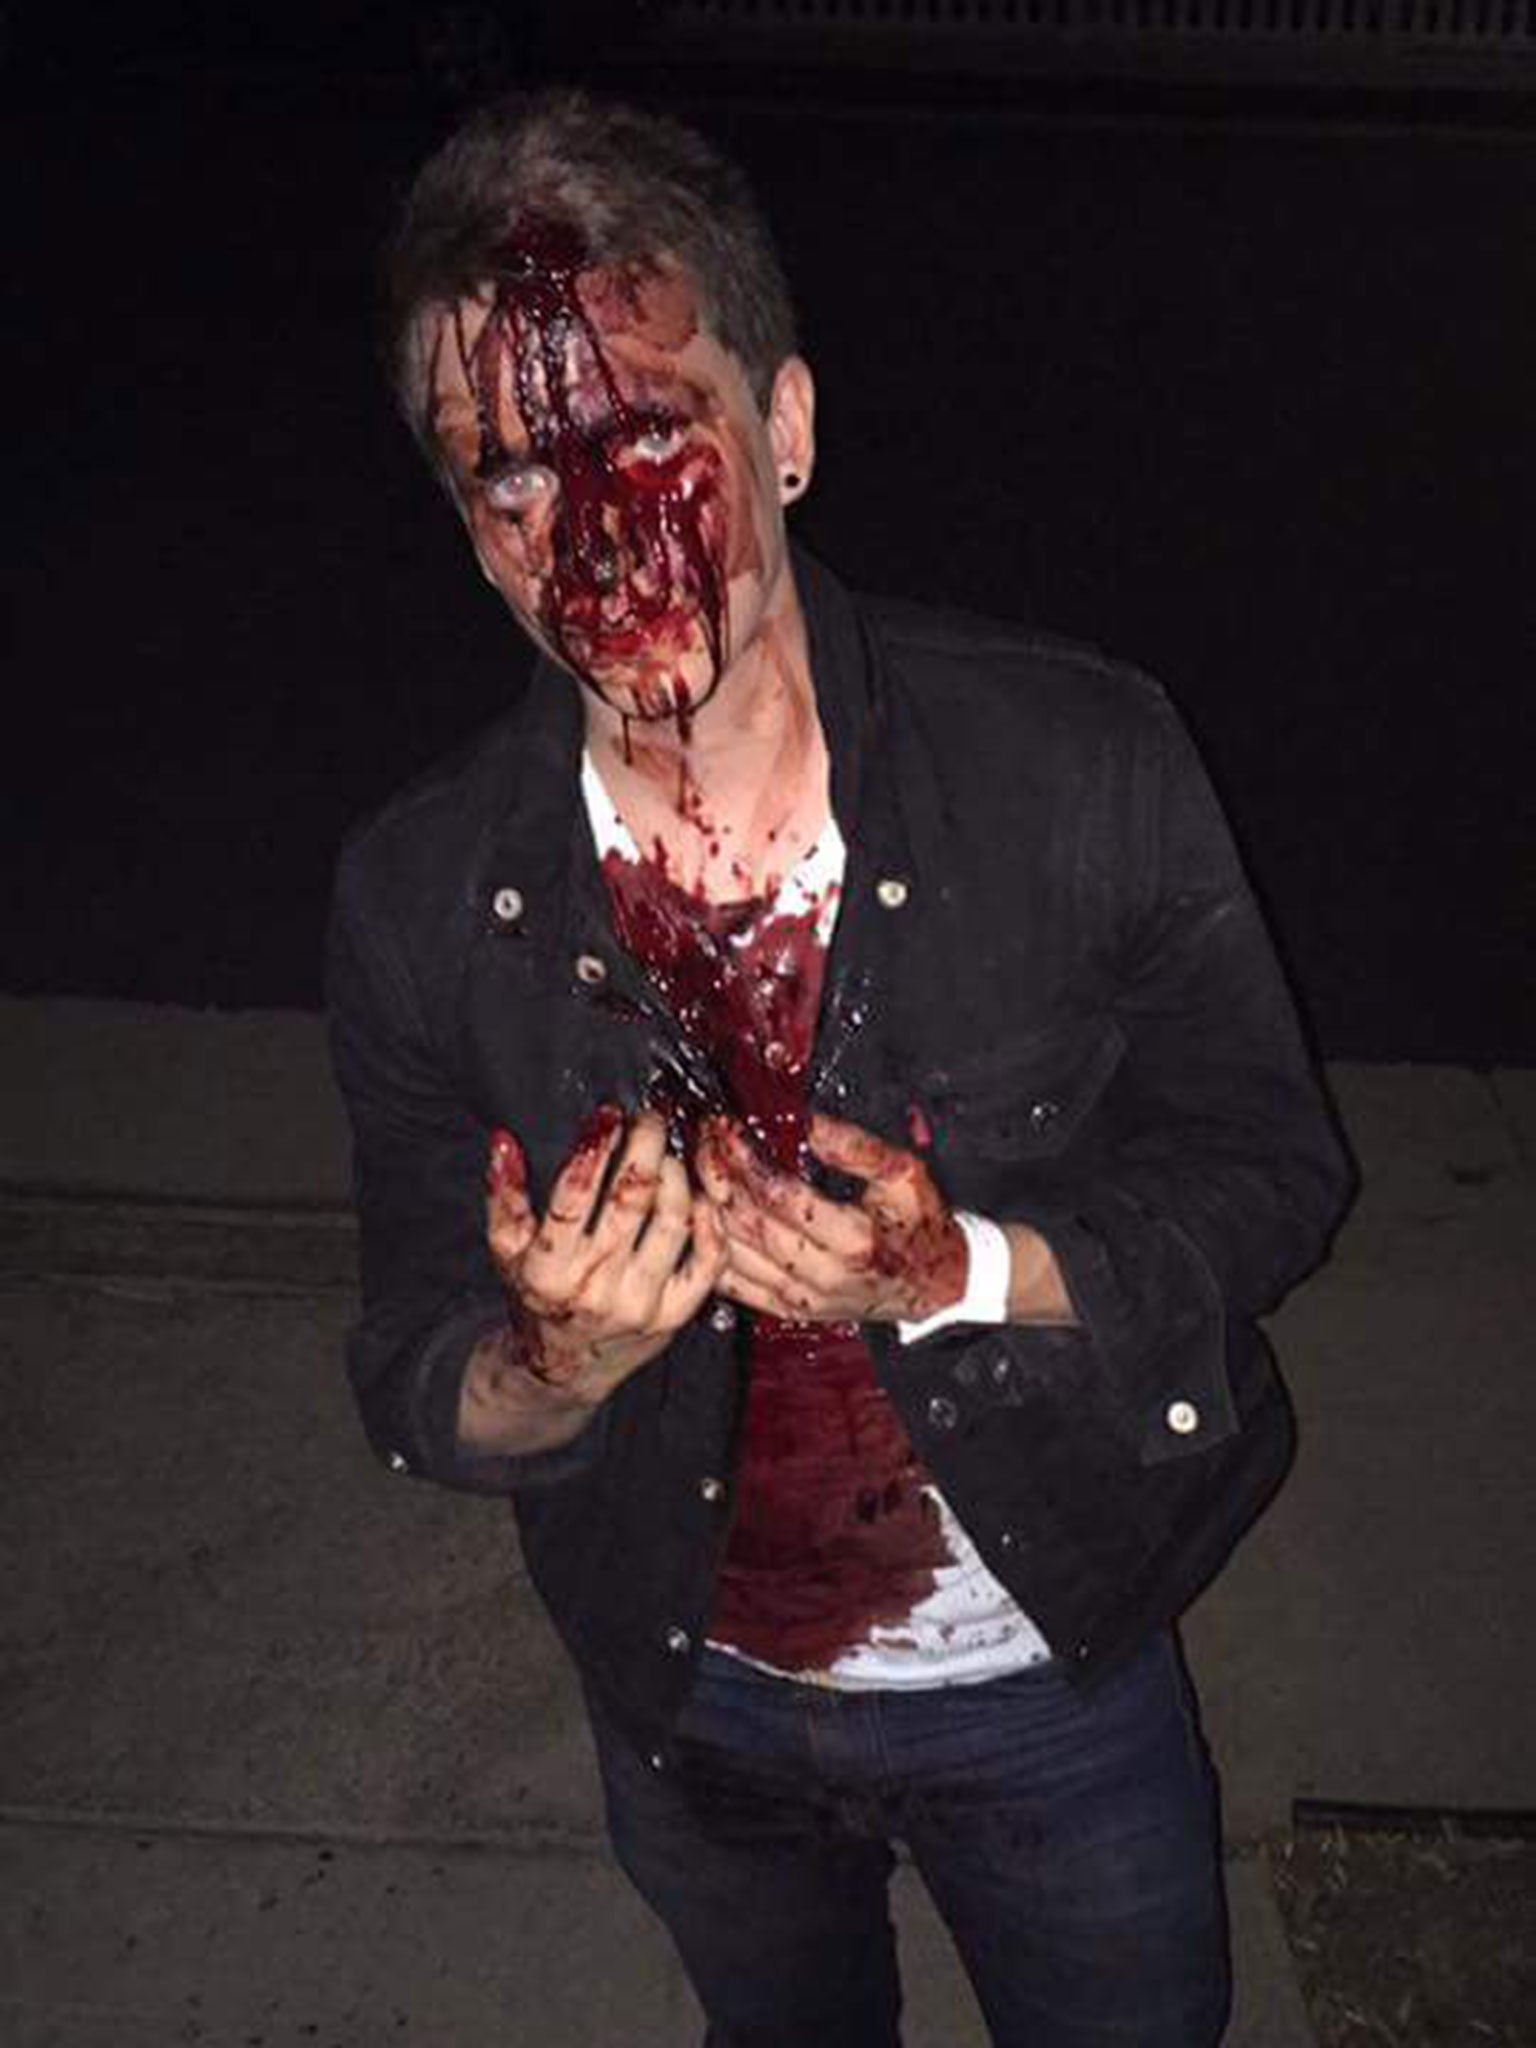 Chris Ball, a fim producer from Calgary, was attacked by men shouting homophobic slurs in Santa Monica on the night of the US election